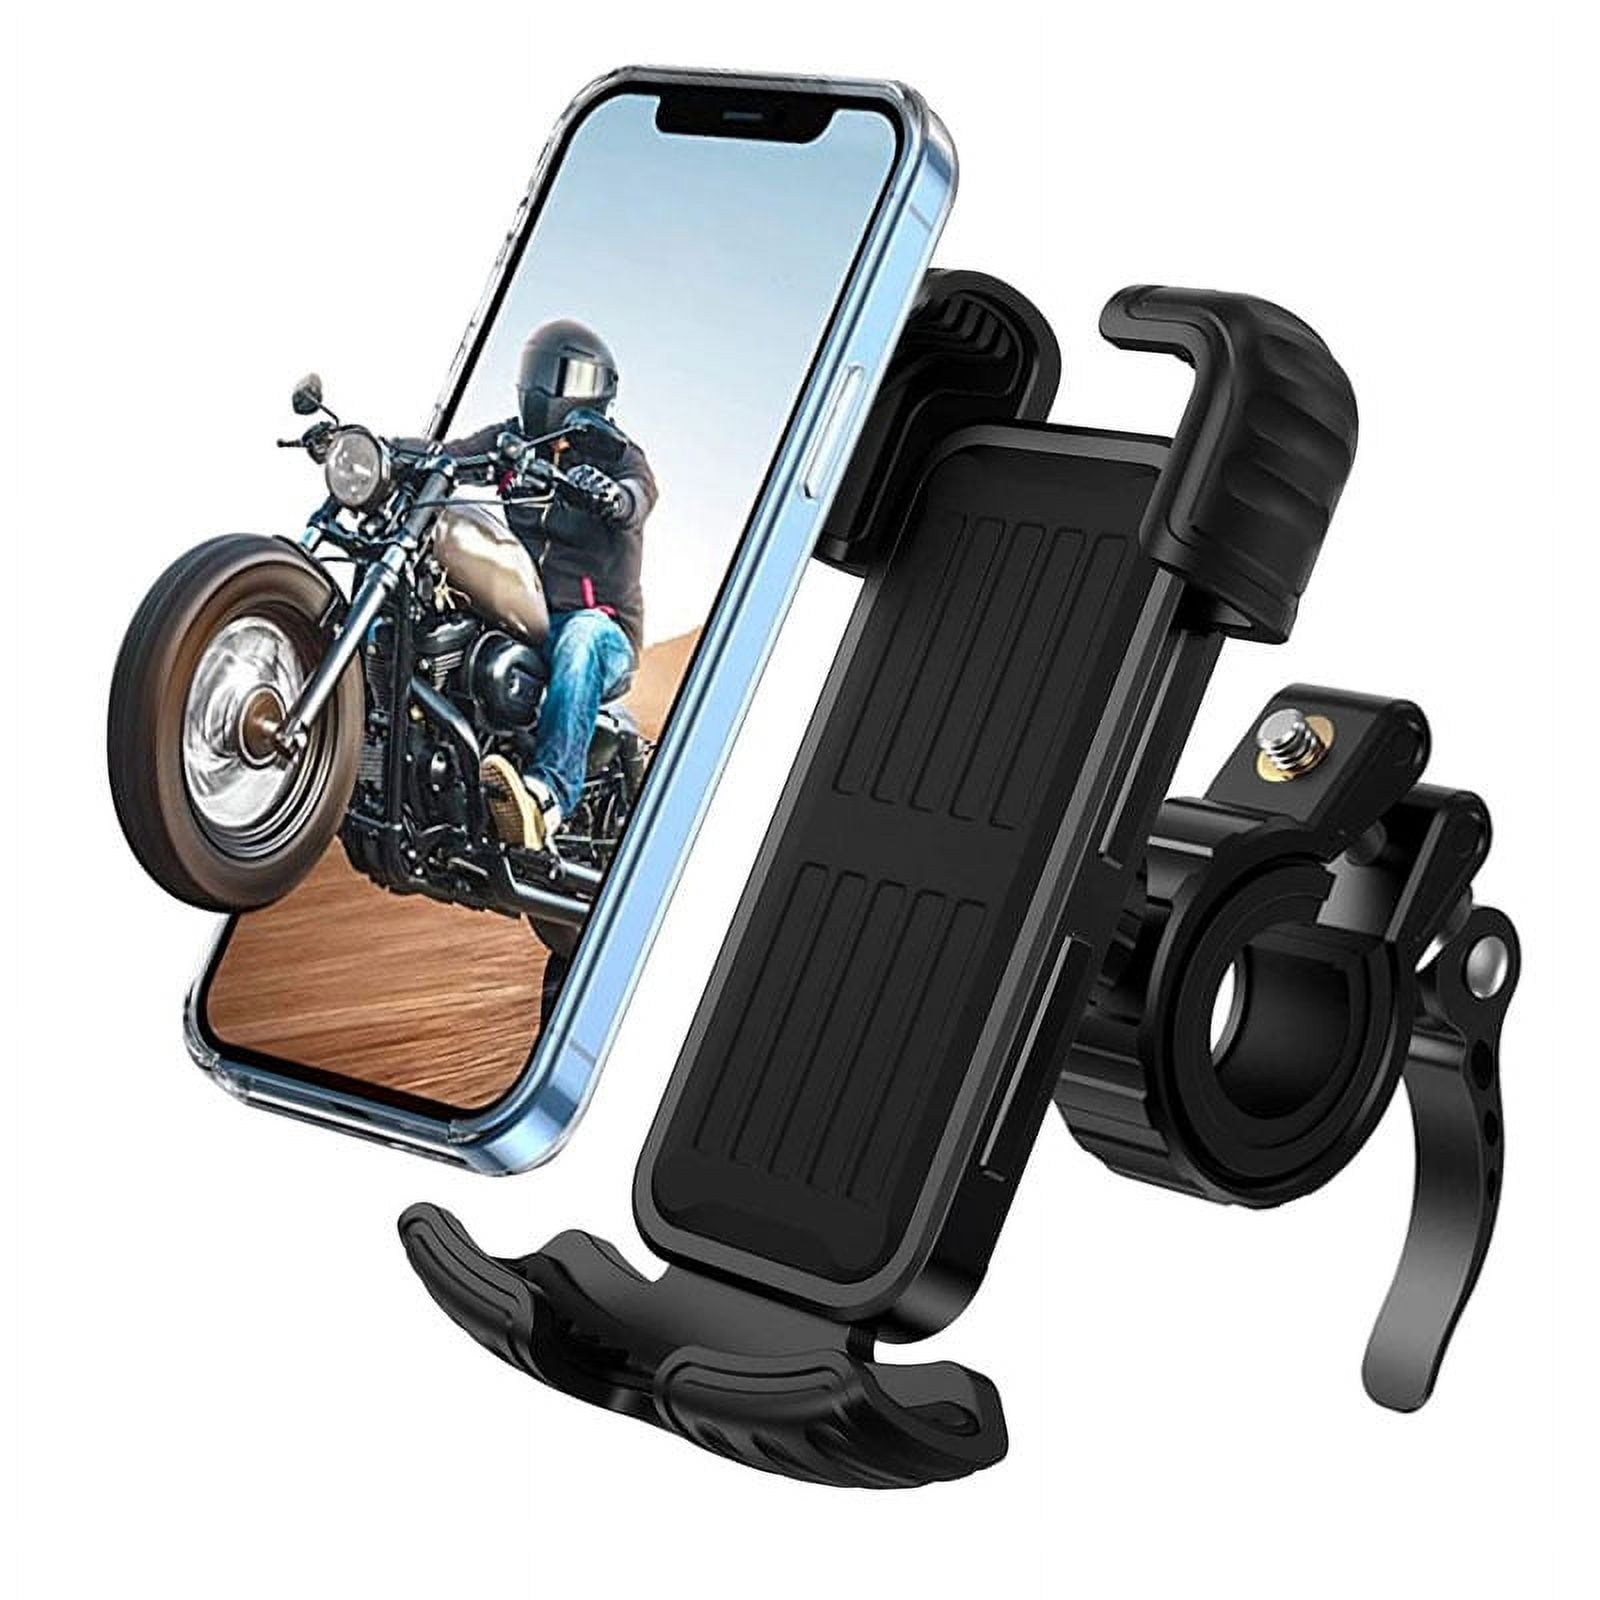 Bike Phone Holder, Motorcycle Phone Mount by LIFETWO - Adjustable